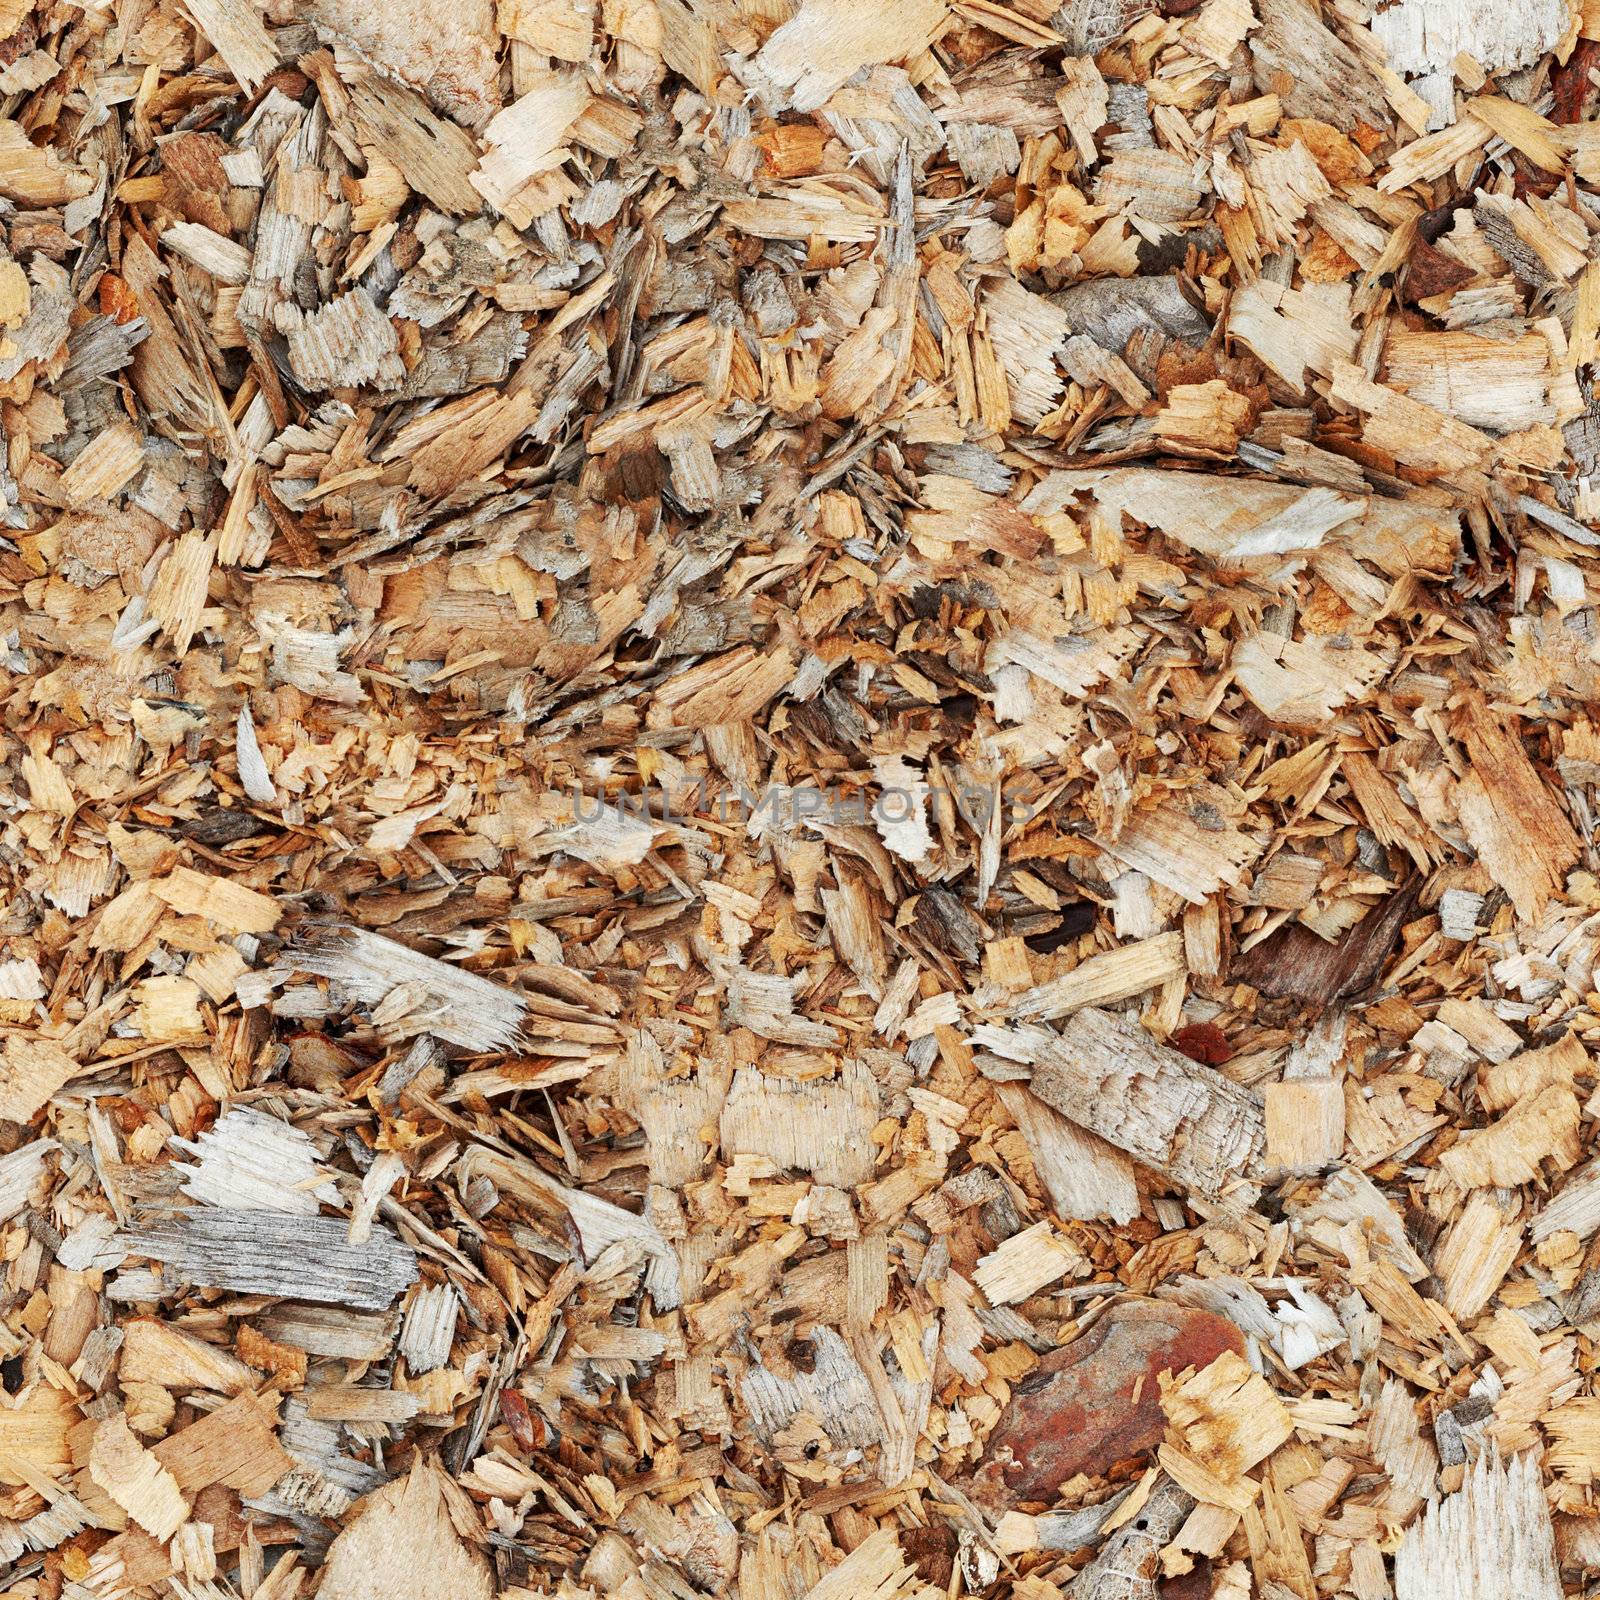 Surface covered with a wood shavings - seamless texture